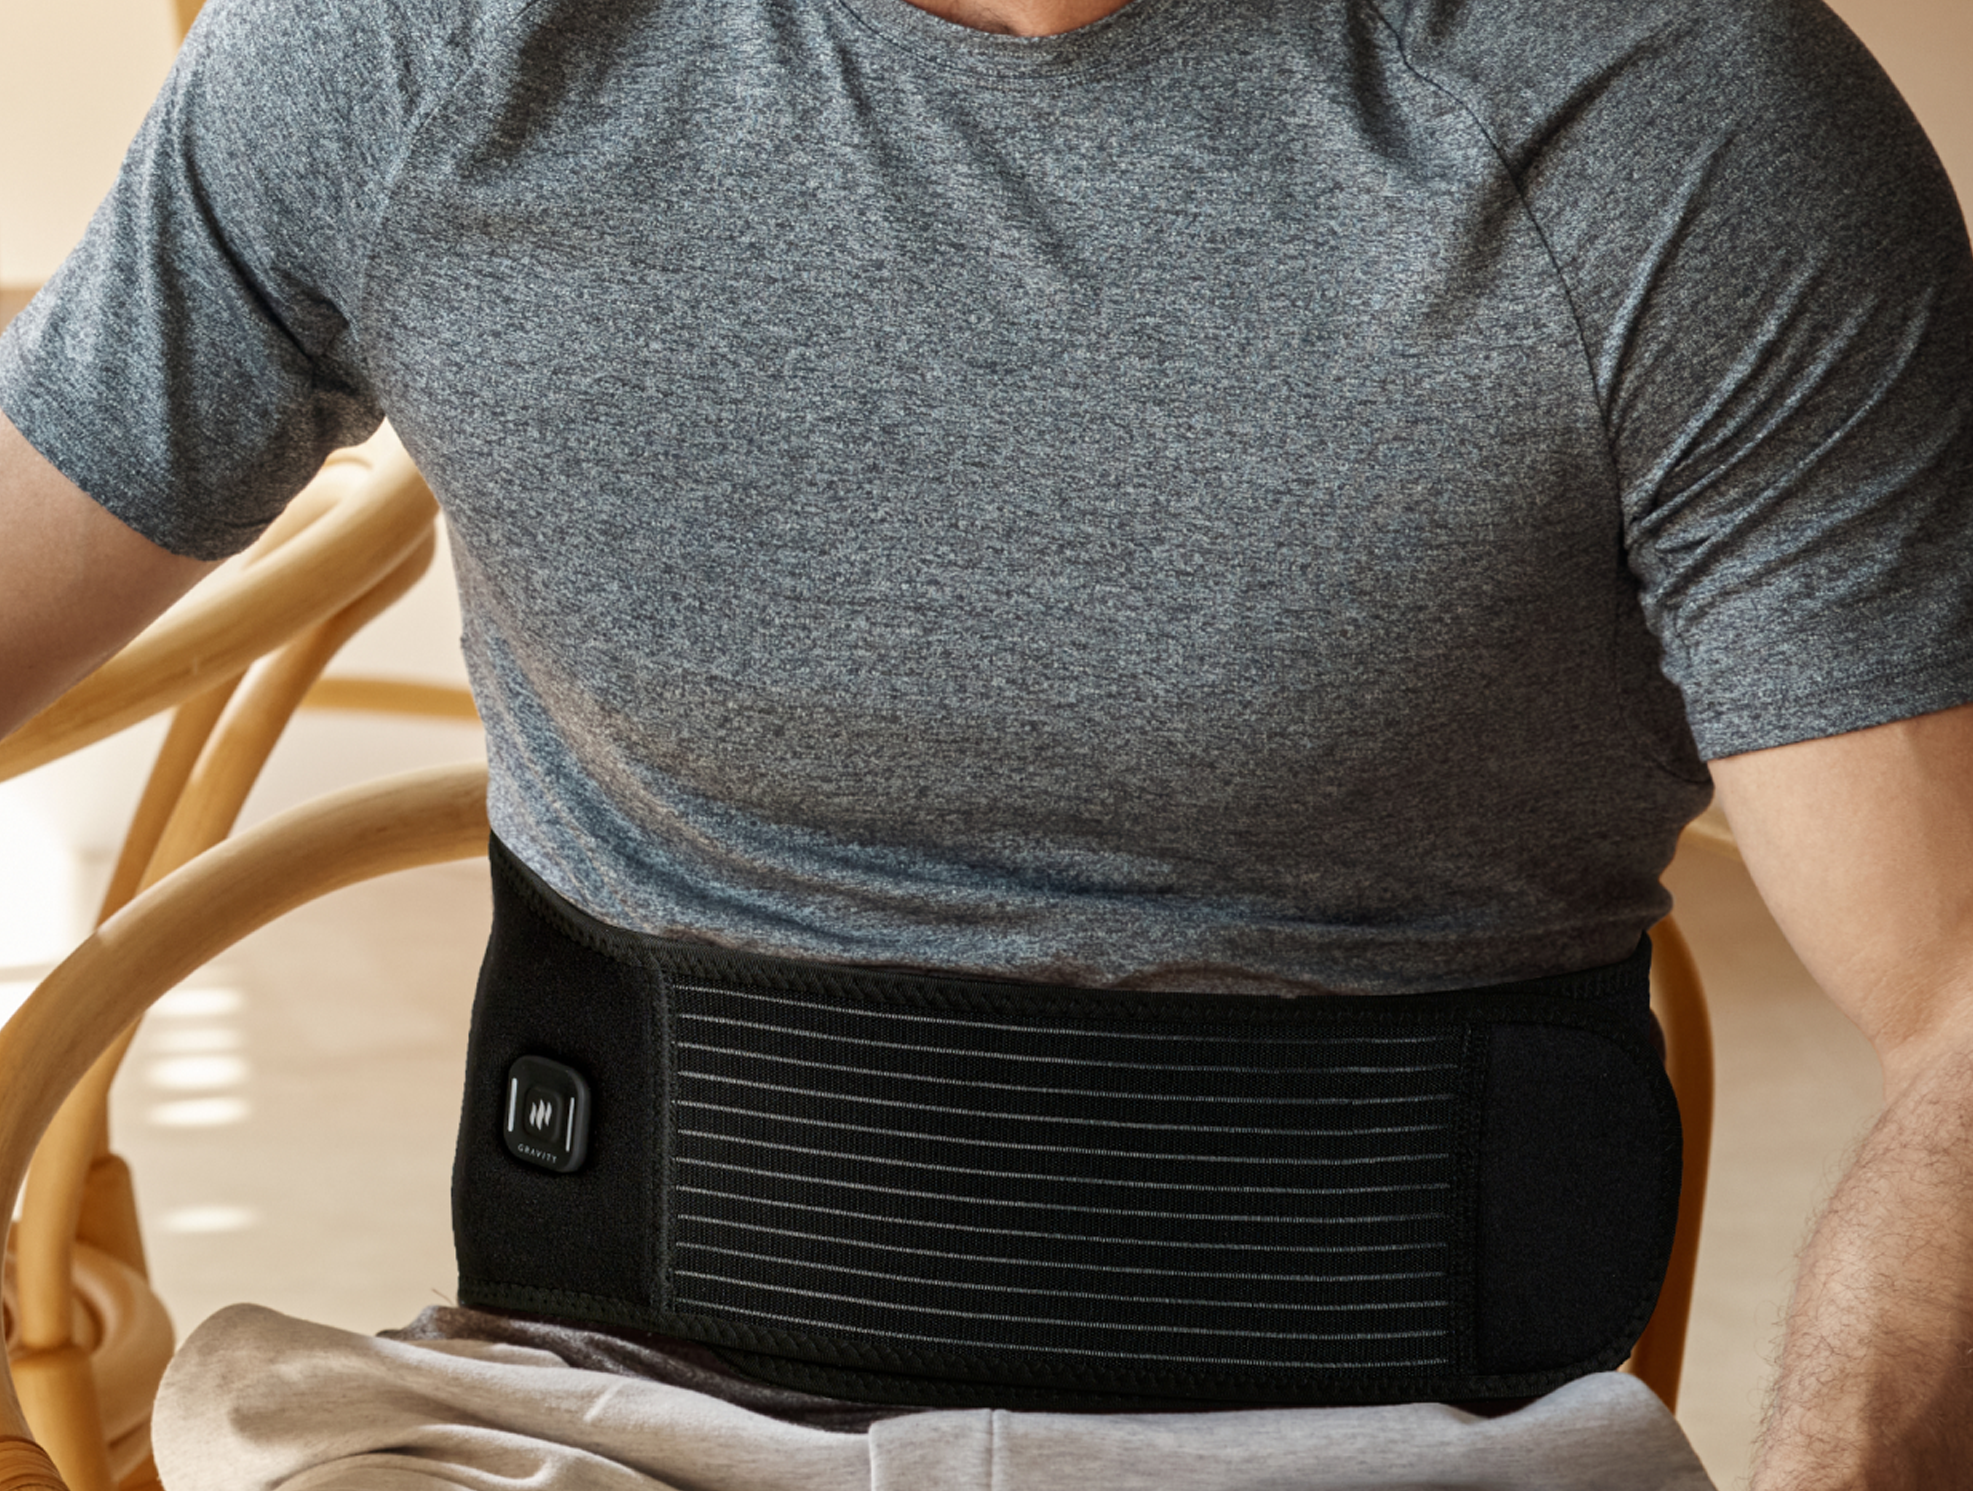 Heated Back Brace Wrap for Lower Back Pain Relief, Oramuon